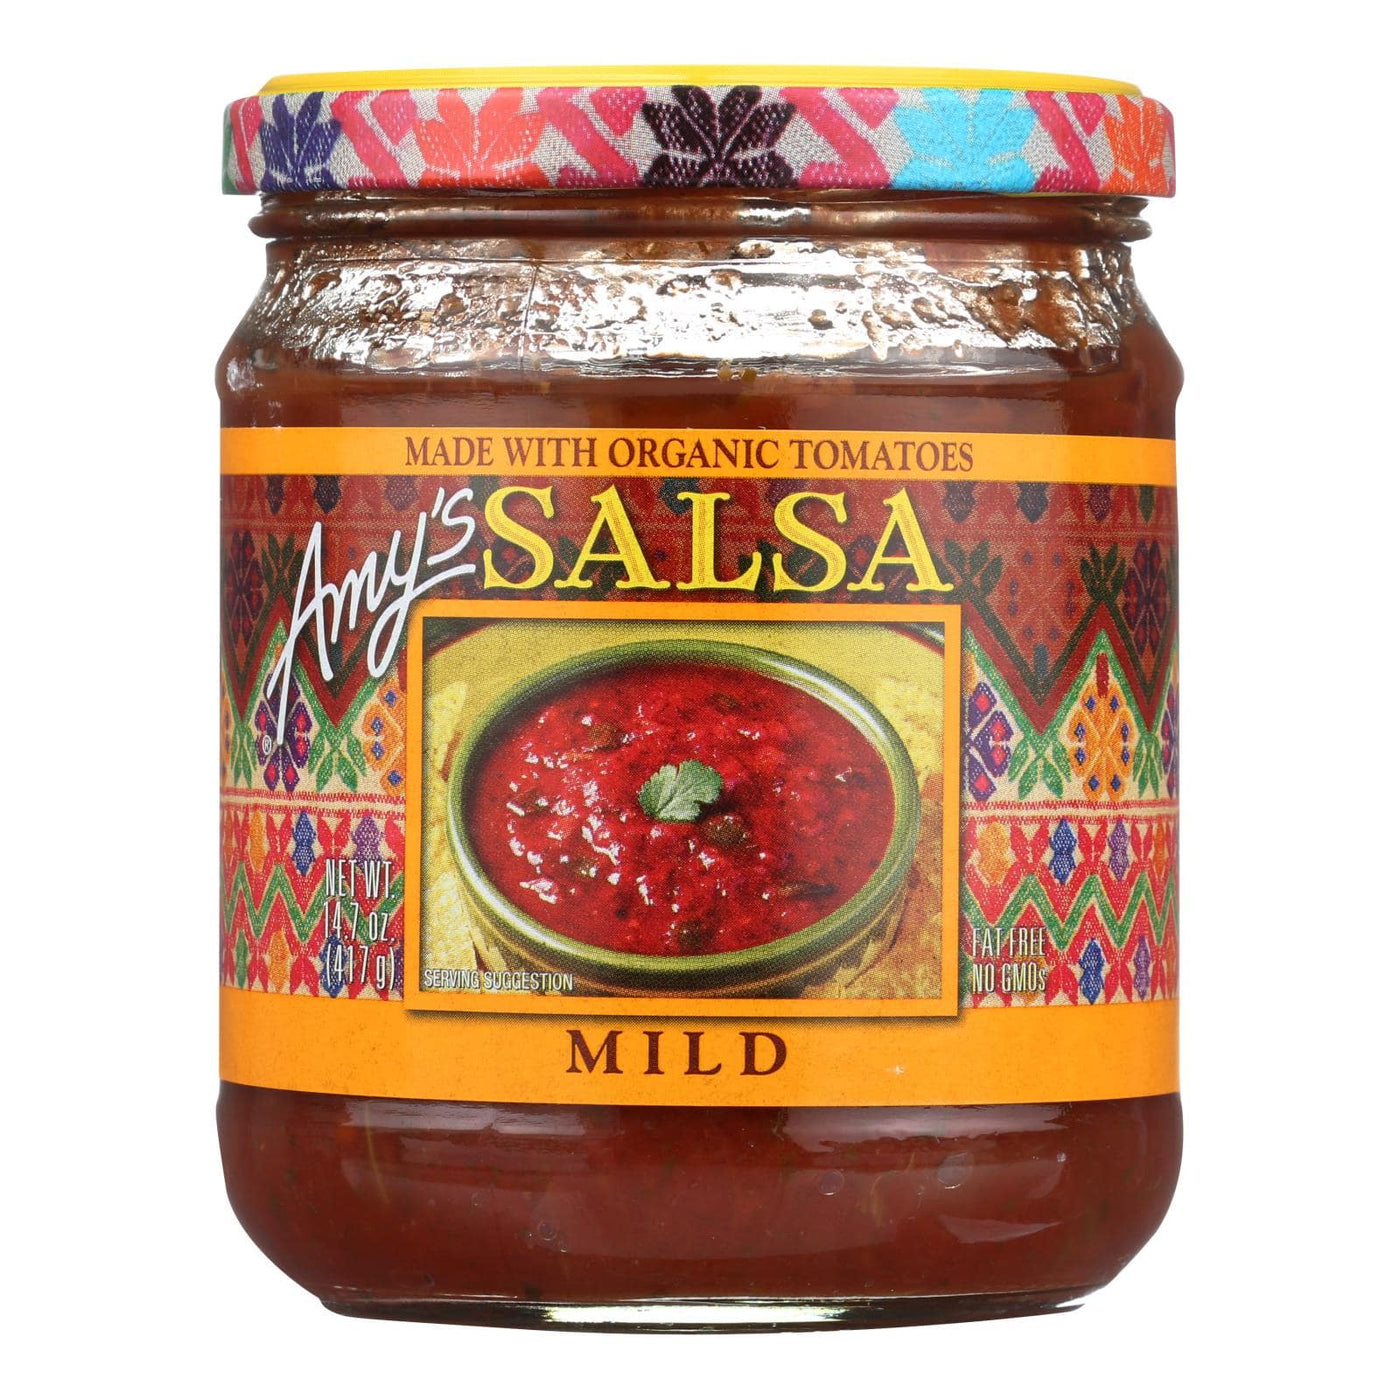 Buy Amy's - Mild Salsa - Made With Organic Ingredients - Case Of 6 - 14.7 Oz  at OnlyNaturals.us